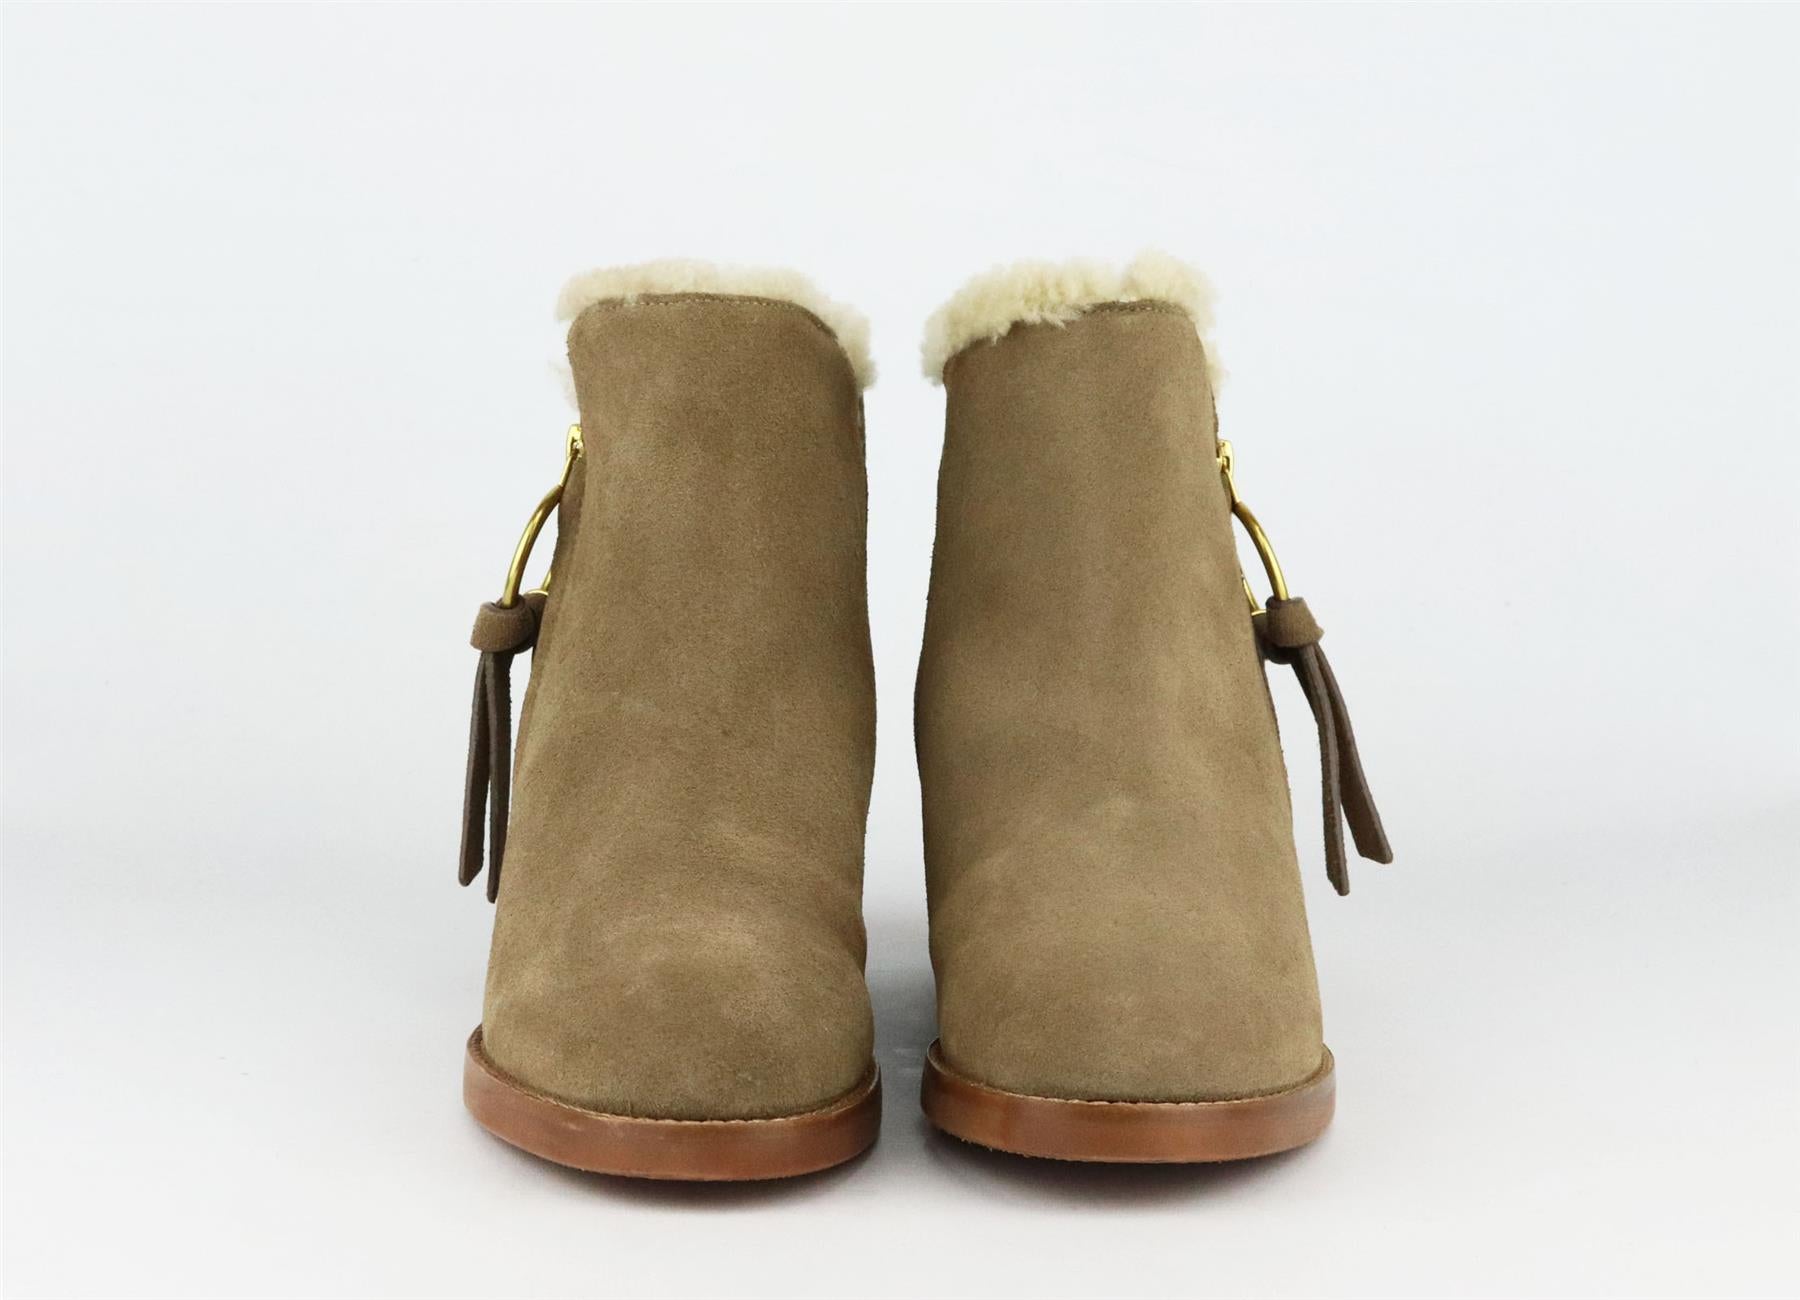 SEE BY CHLOE SHEARLING LINED SUEDE ANKLE BOOTS EU 38.5 UK 5.5 US 8.5